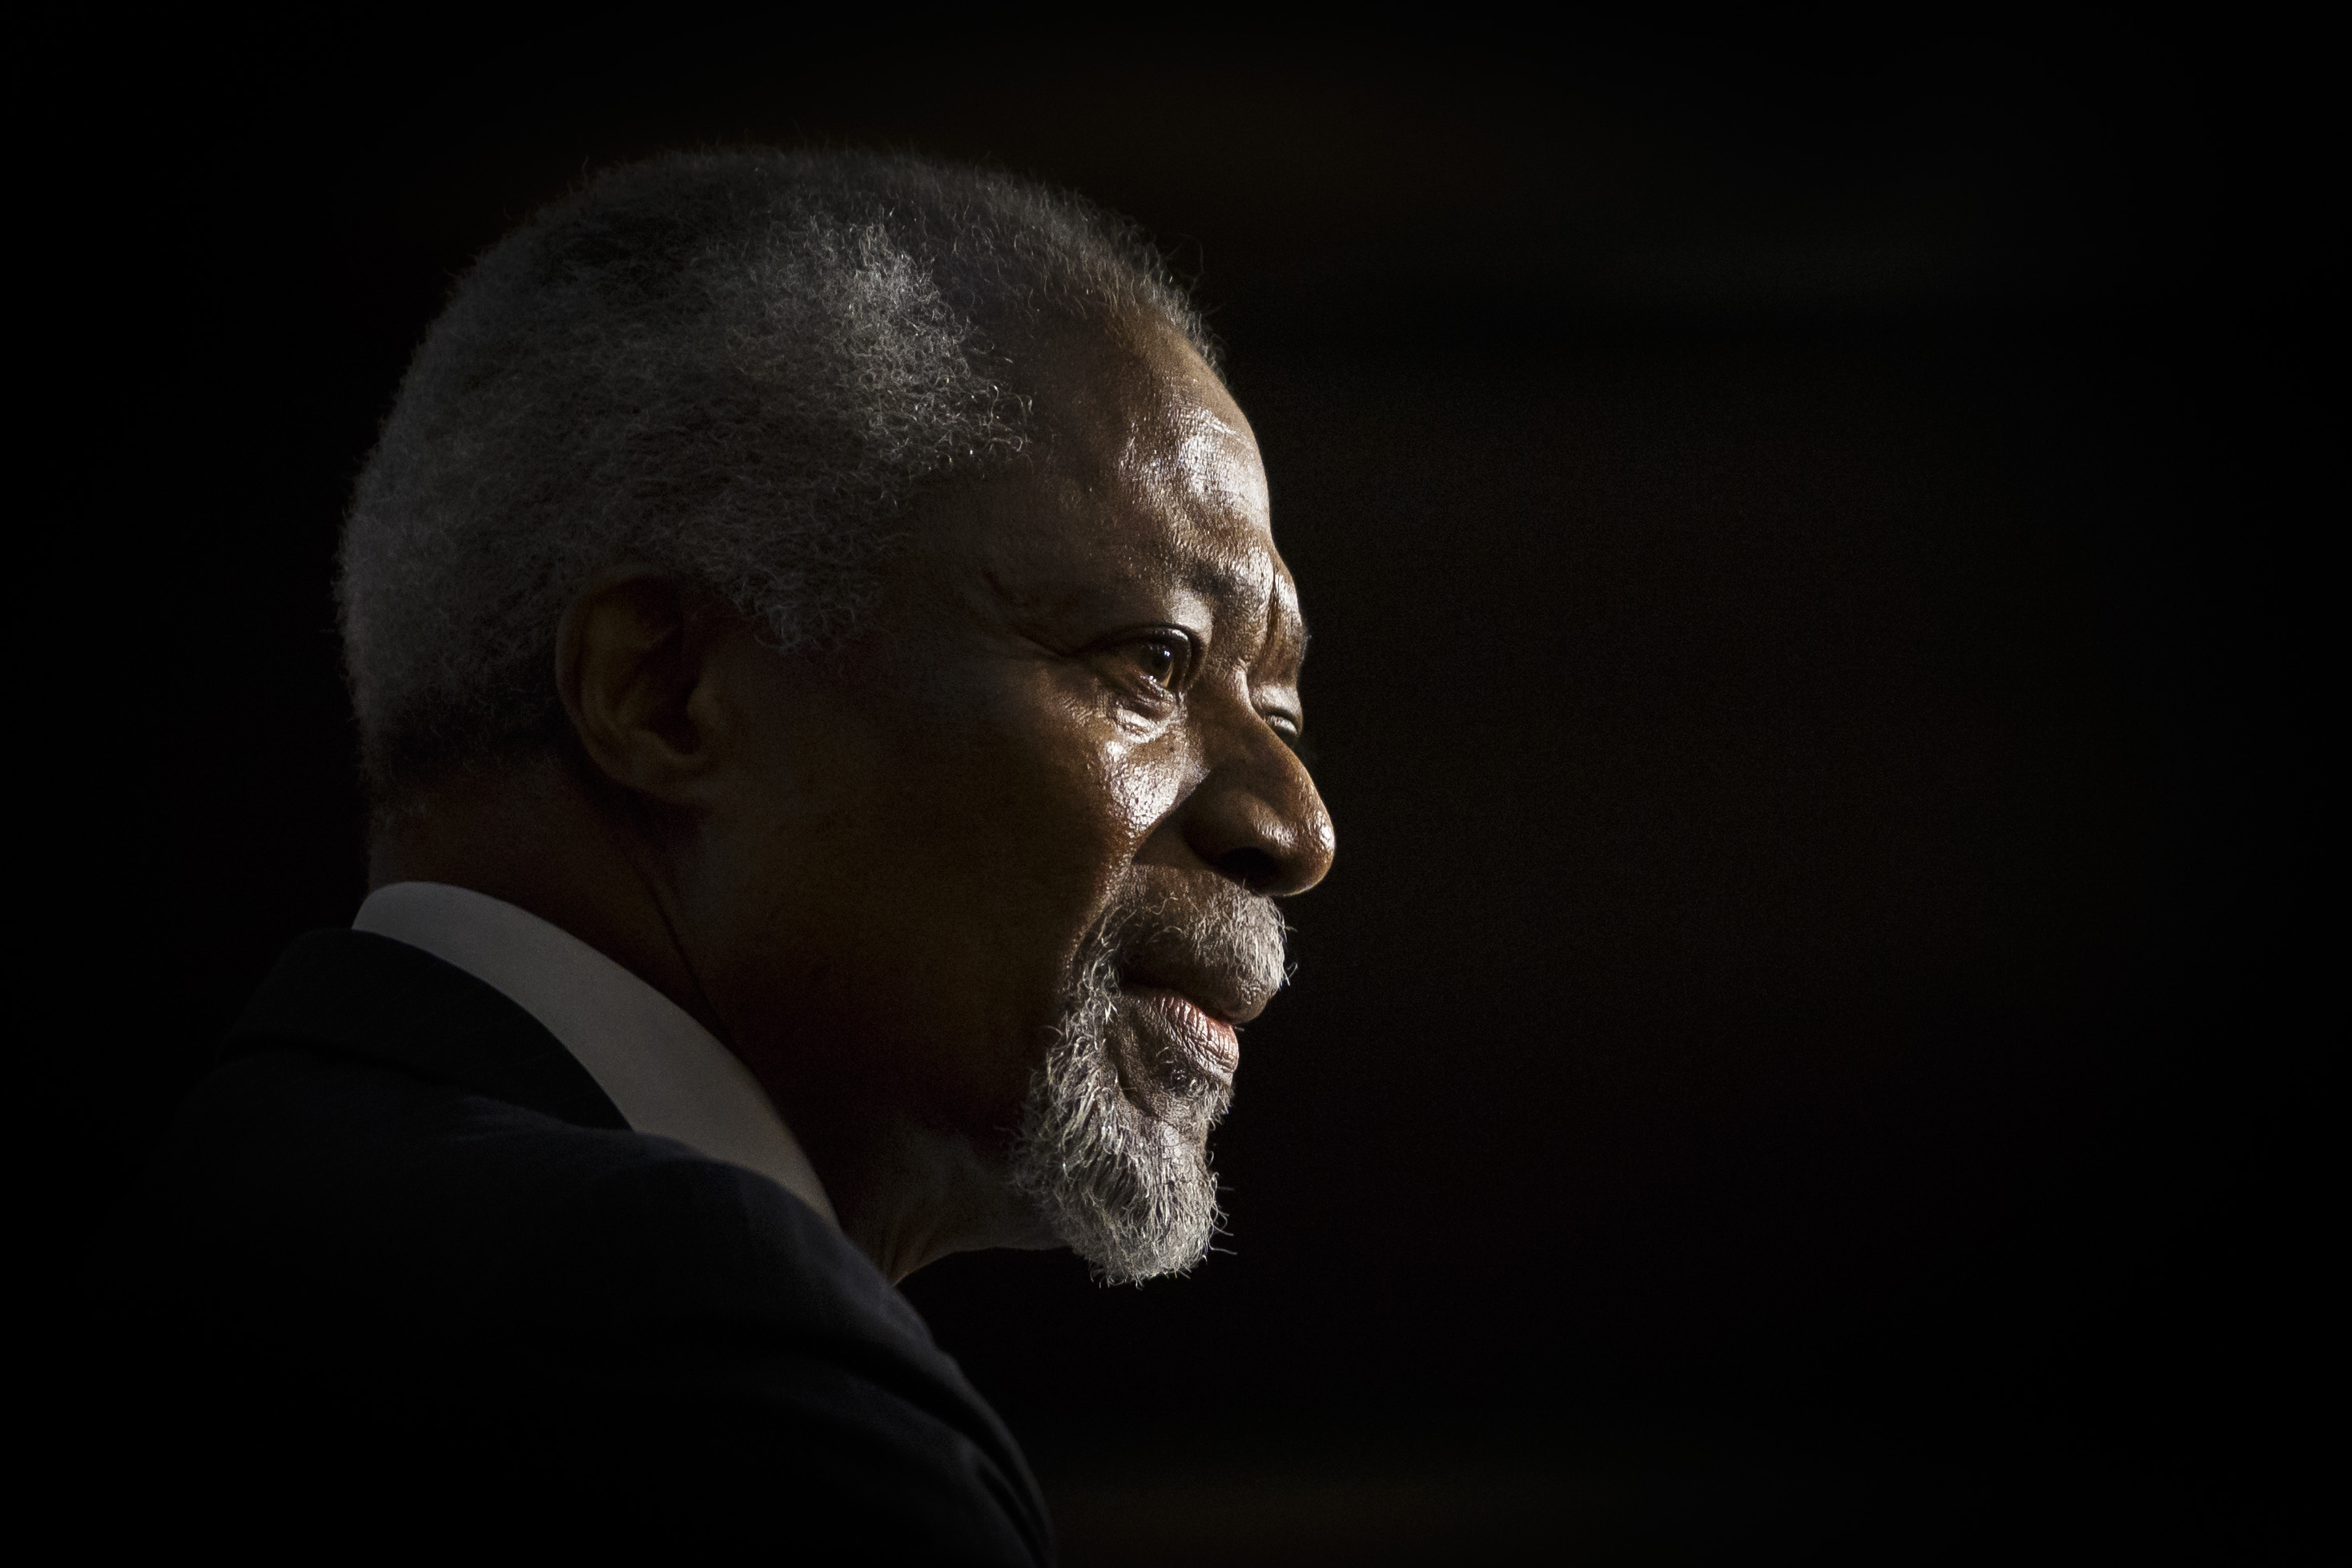 Kofi Annan, 7th Secretary-General of the United Nations, will give a lecture entitled "Looking for a New Global Order" at German Foreign Ministry on January 28, 2016 in Berlin, Germany. (Thomas Trutschel—Photothek via Getty Images)